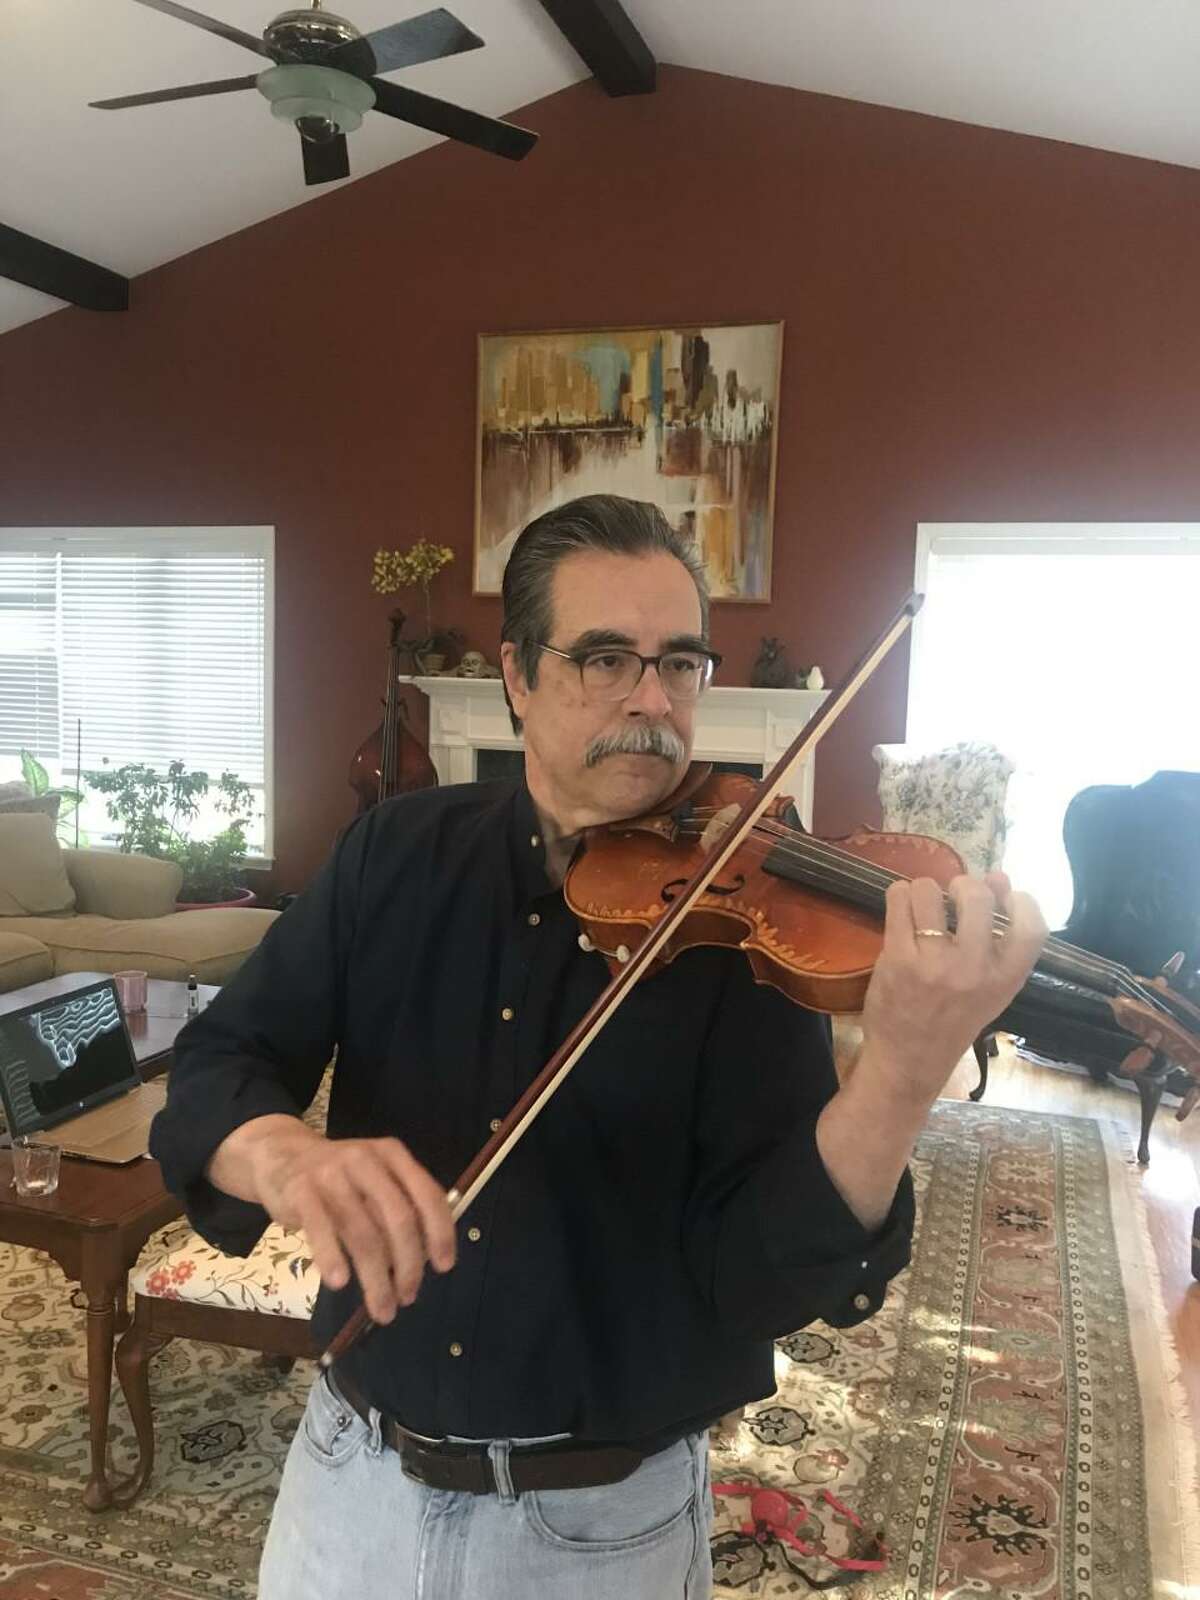 Mac Johnston plays the violin in his living room in Wilton.